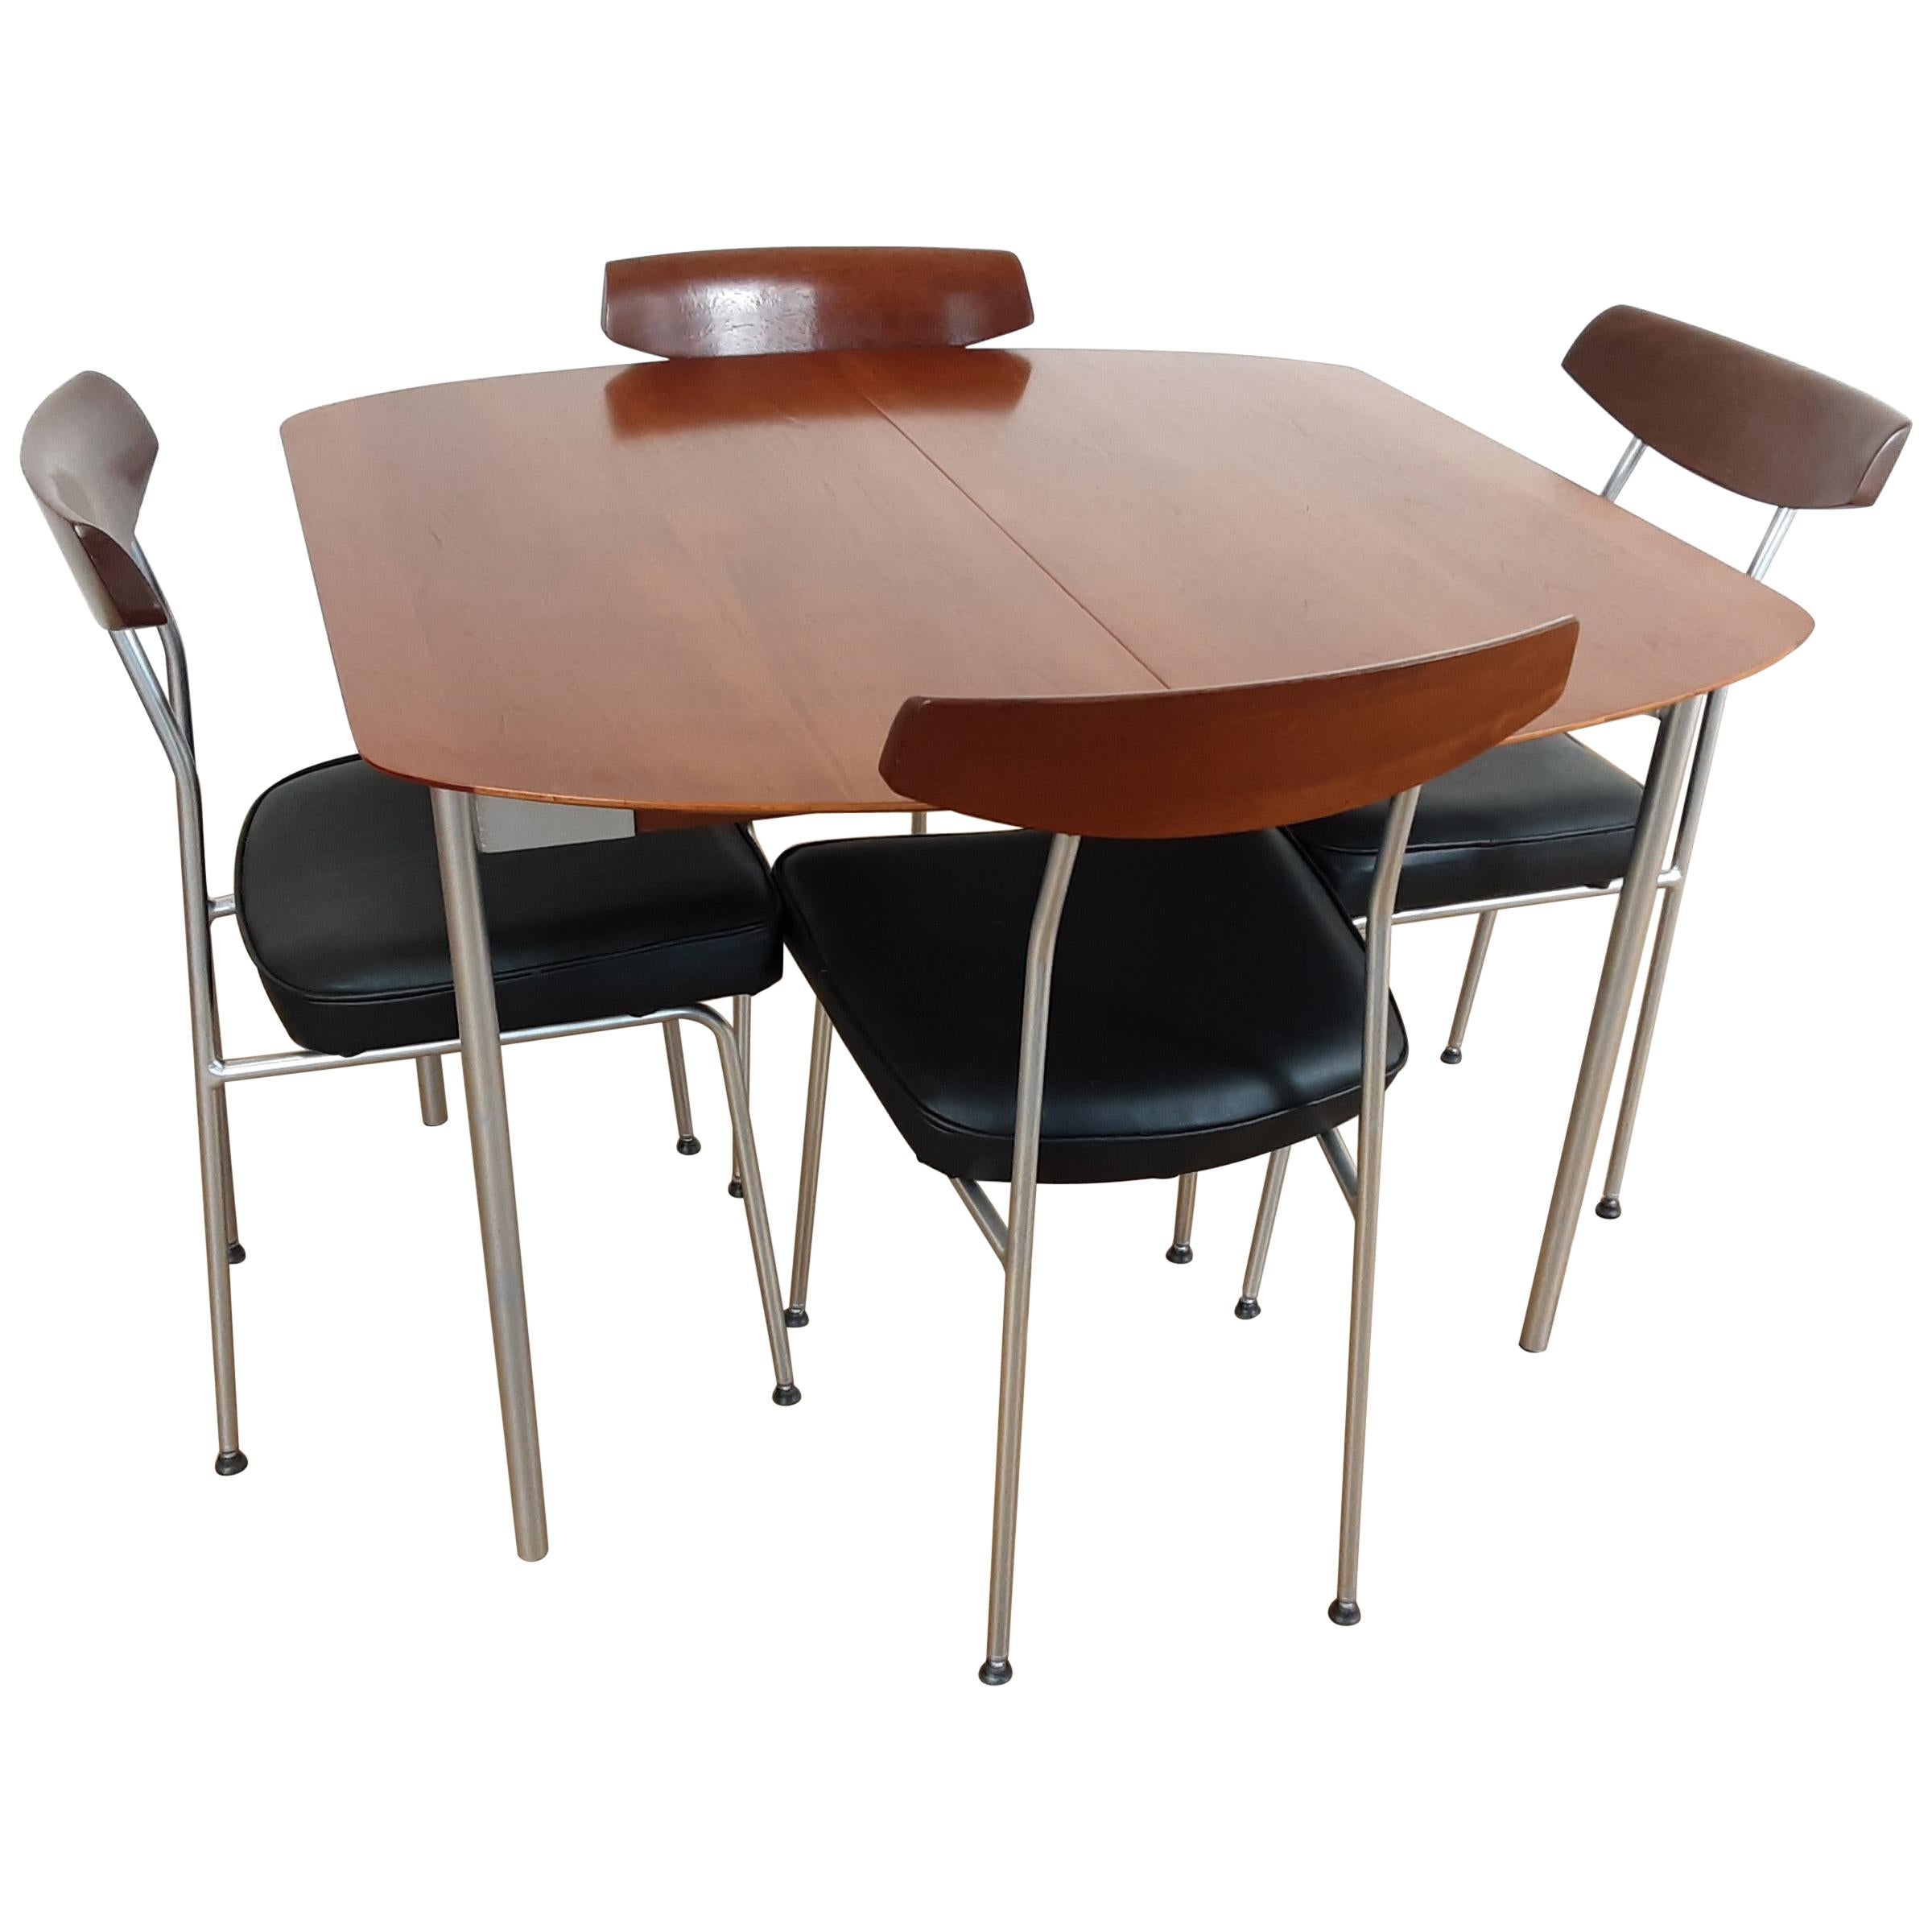 Midcentury Teak Dining Table and 4 Chairs by John and Sylvia Reid for Stag For Sale